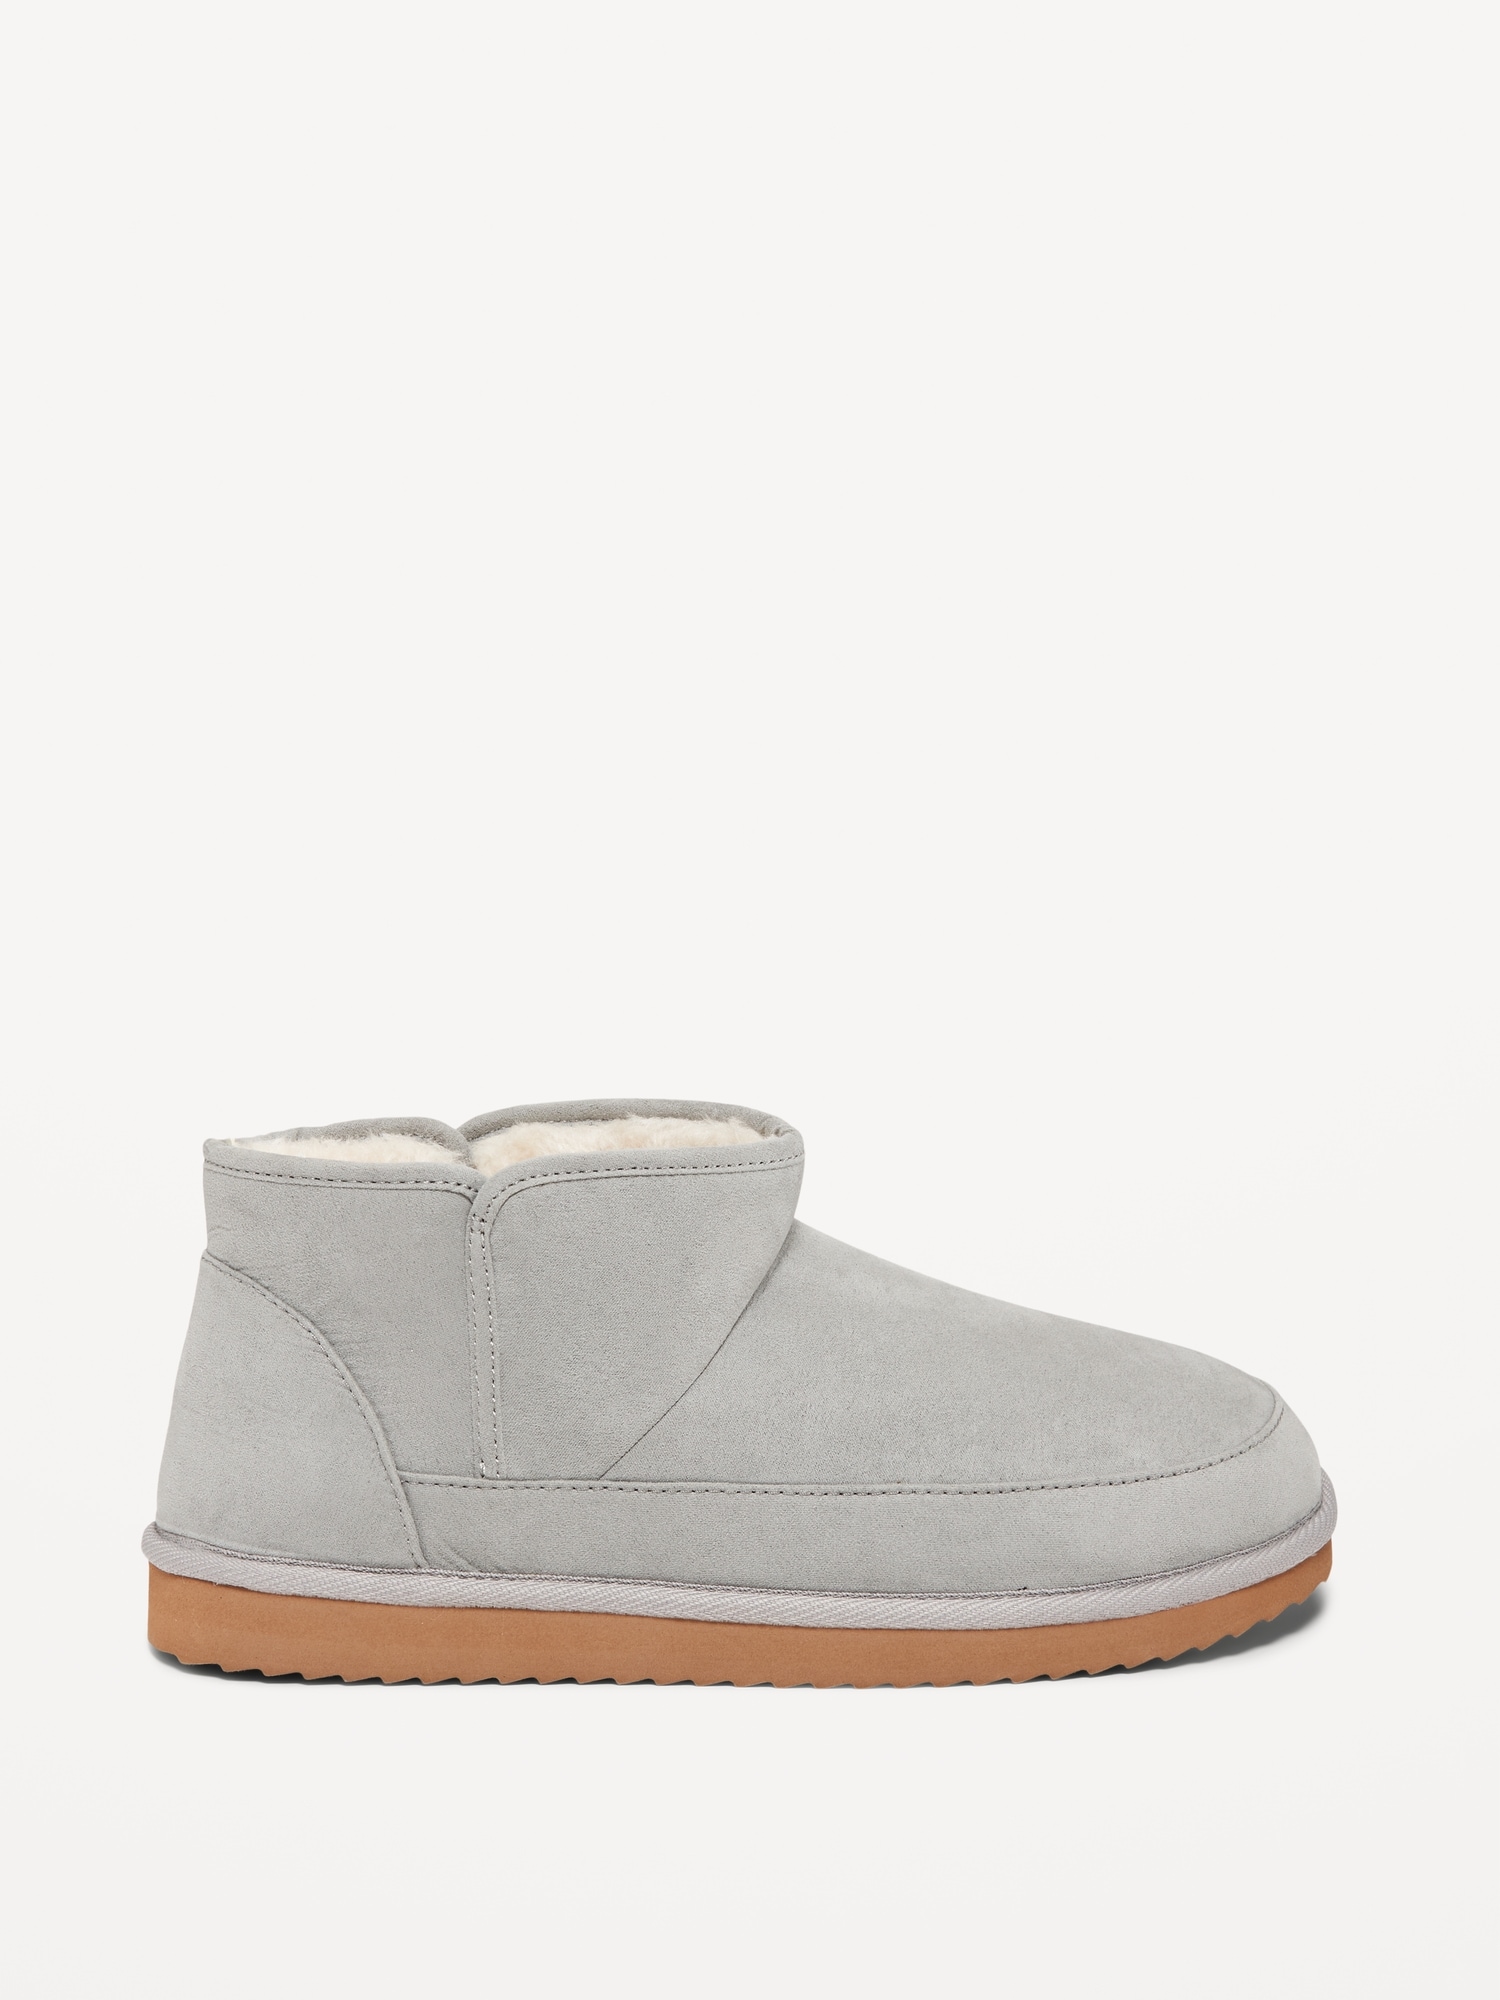 Faux Suede Sherpa-Lined Slippers | Old Navy